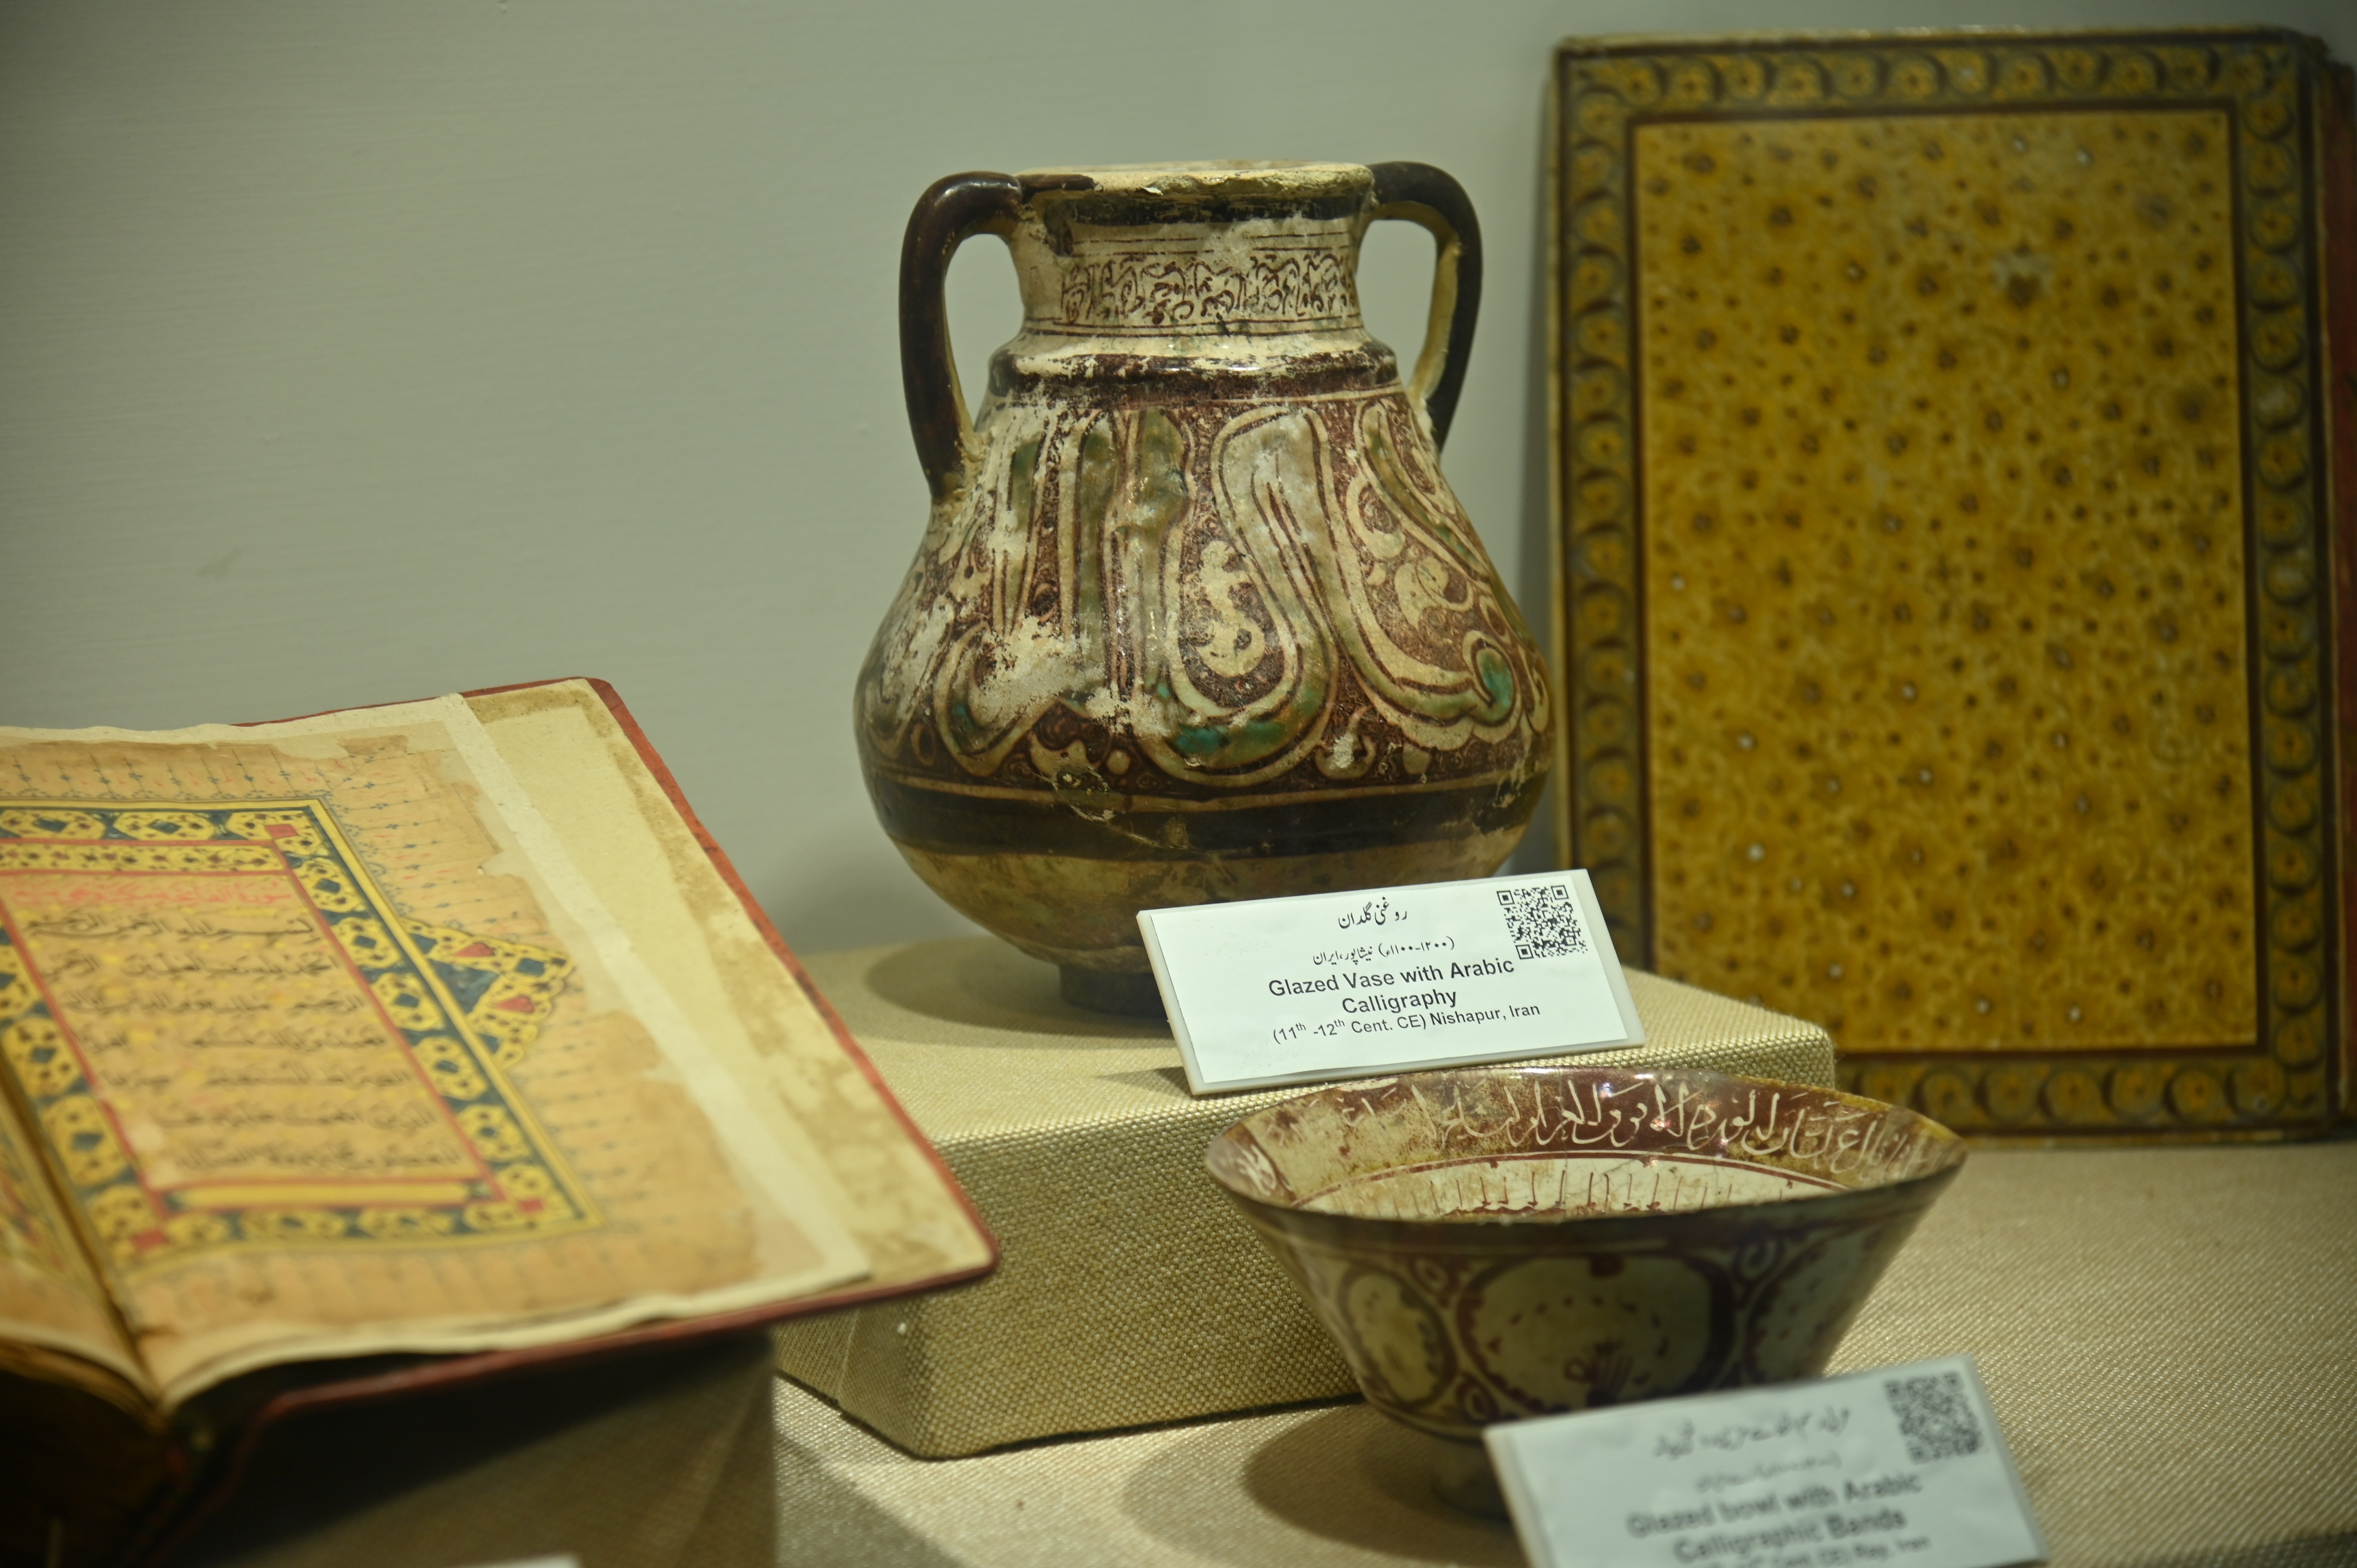 The Glazed Flask with Arabic Calligraphy